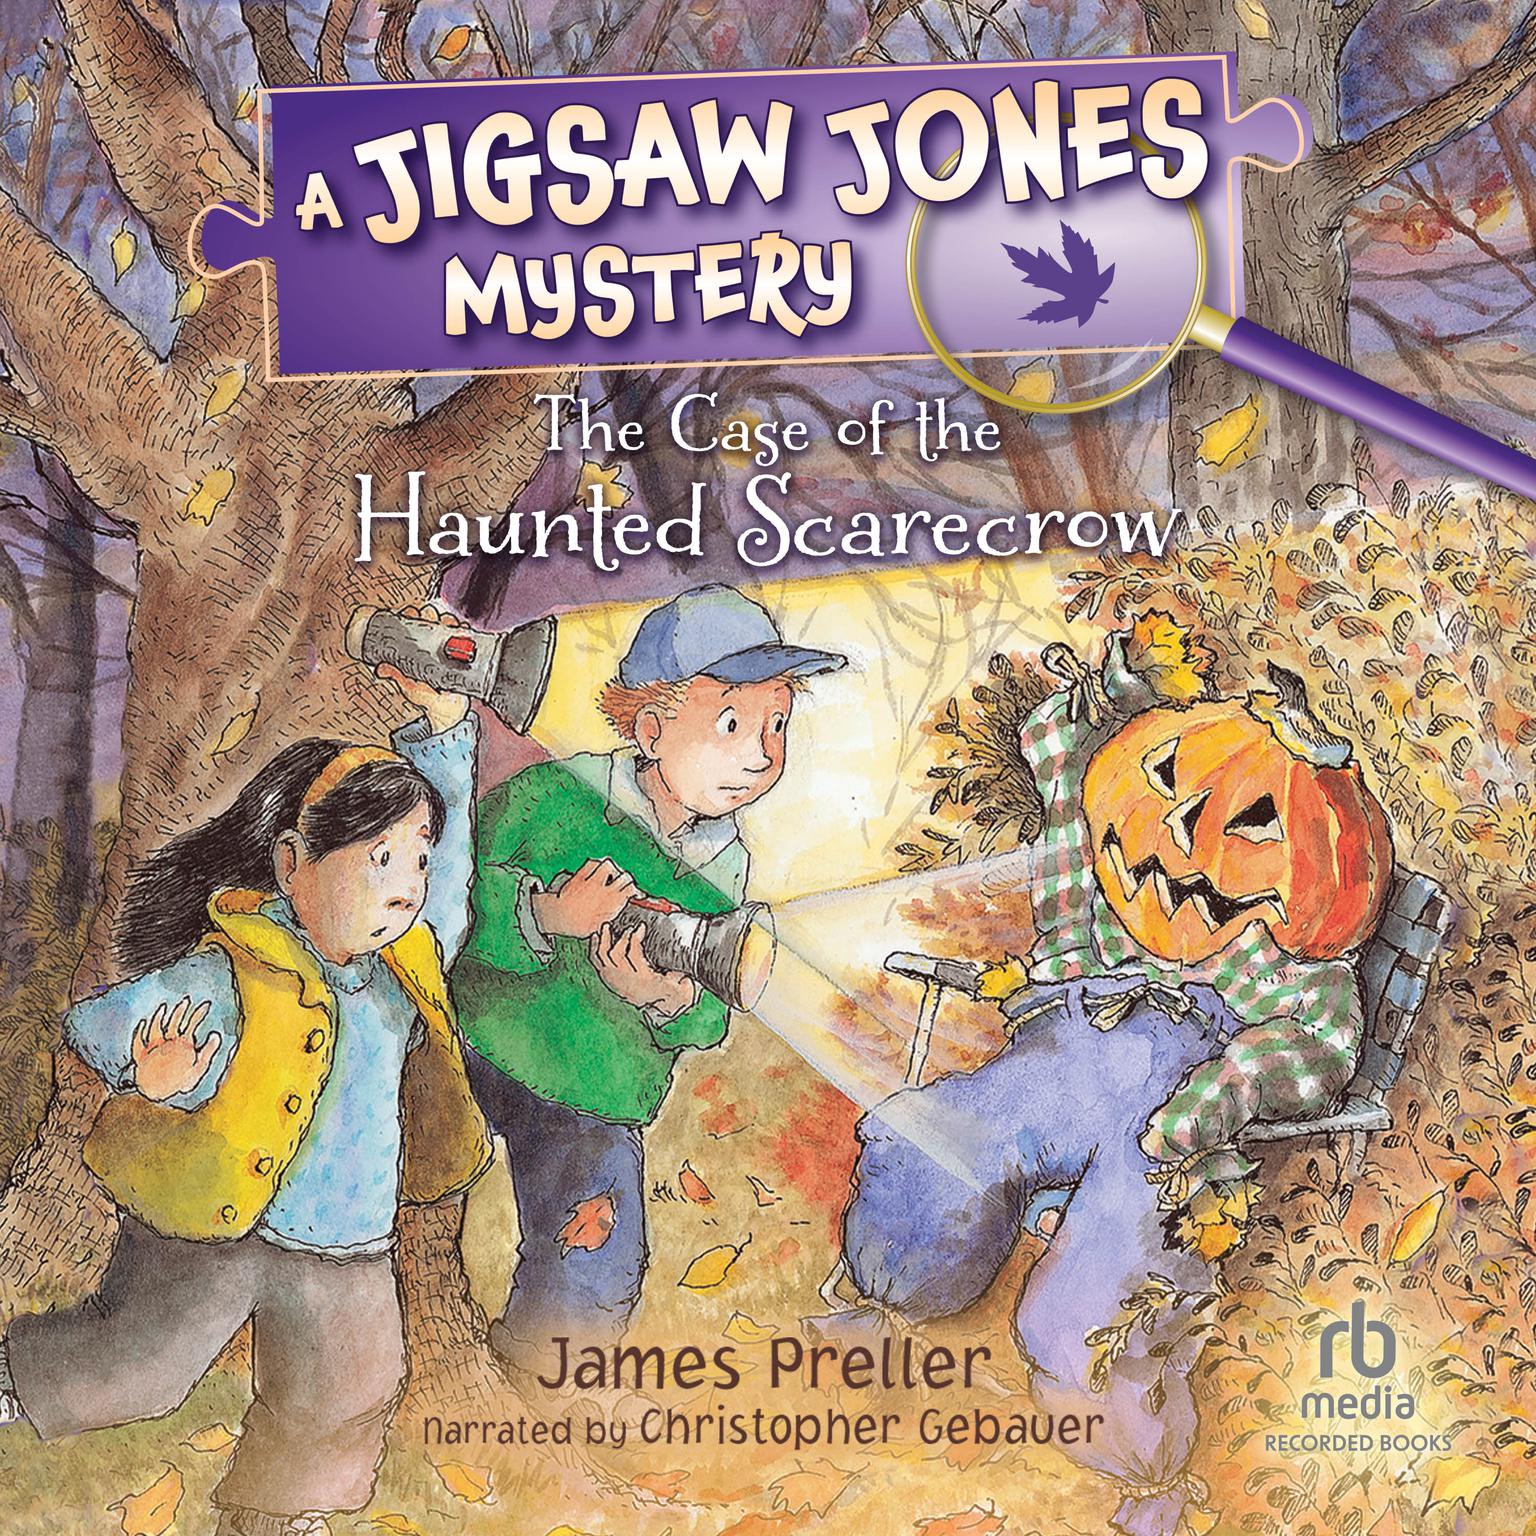 The Case of the Haunted Scarecrow Audiobook, by James Preller